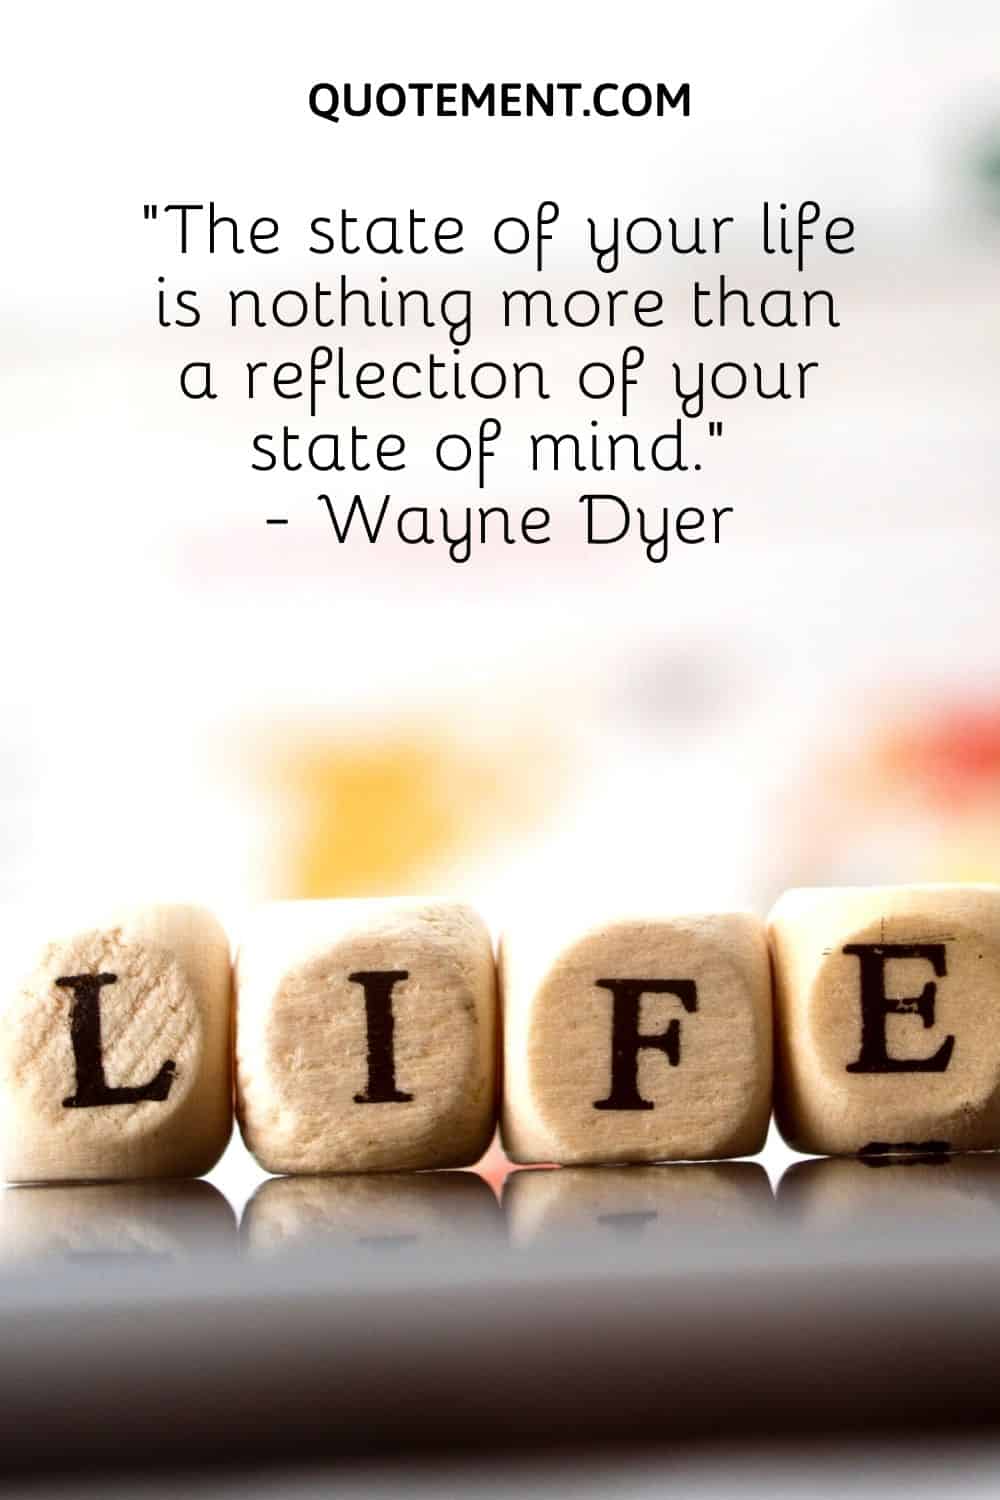 The state of your life is nothing more than a reflection of your state of mind